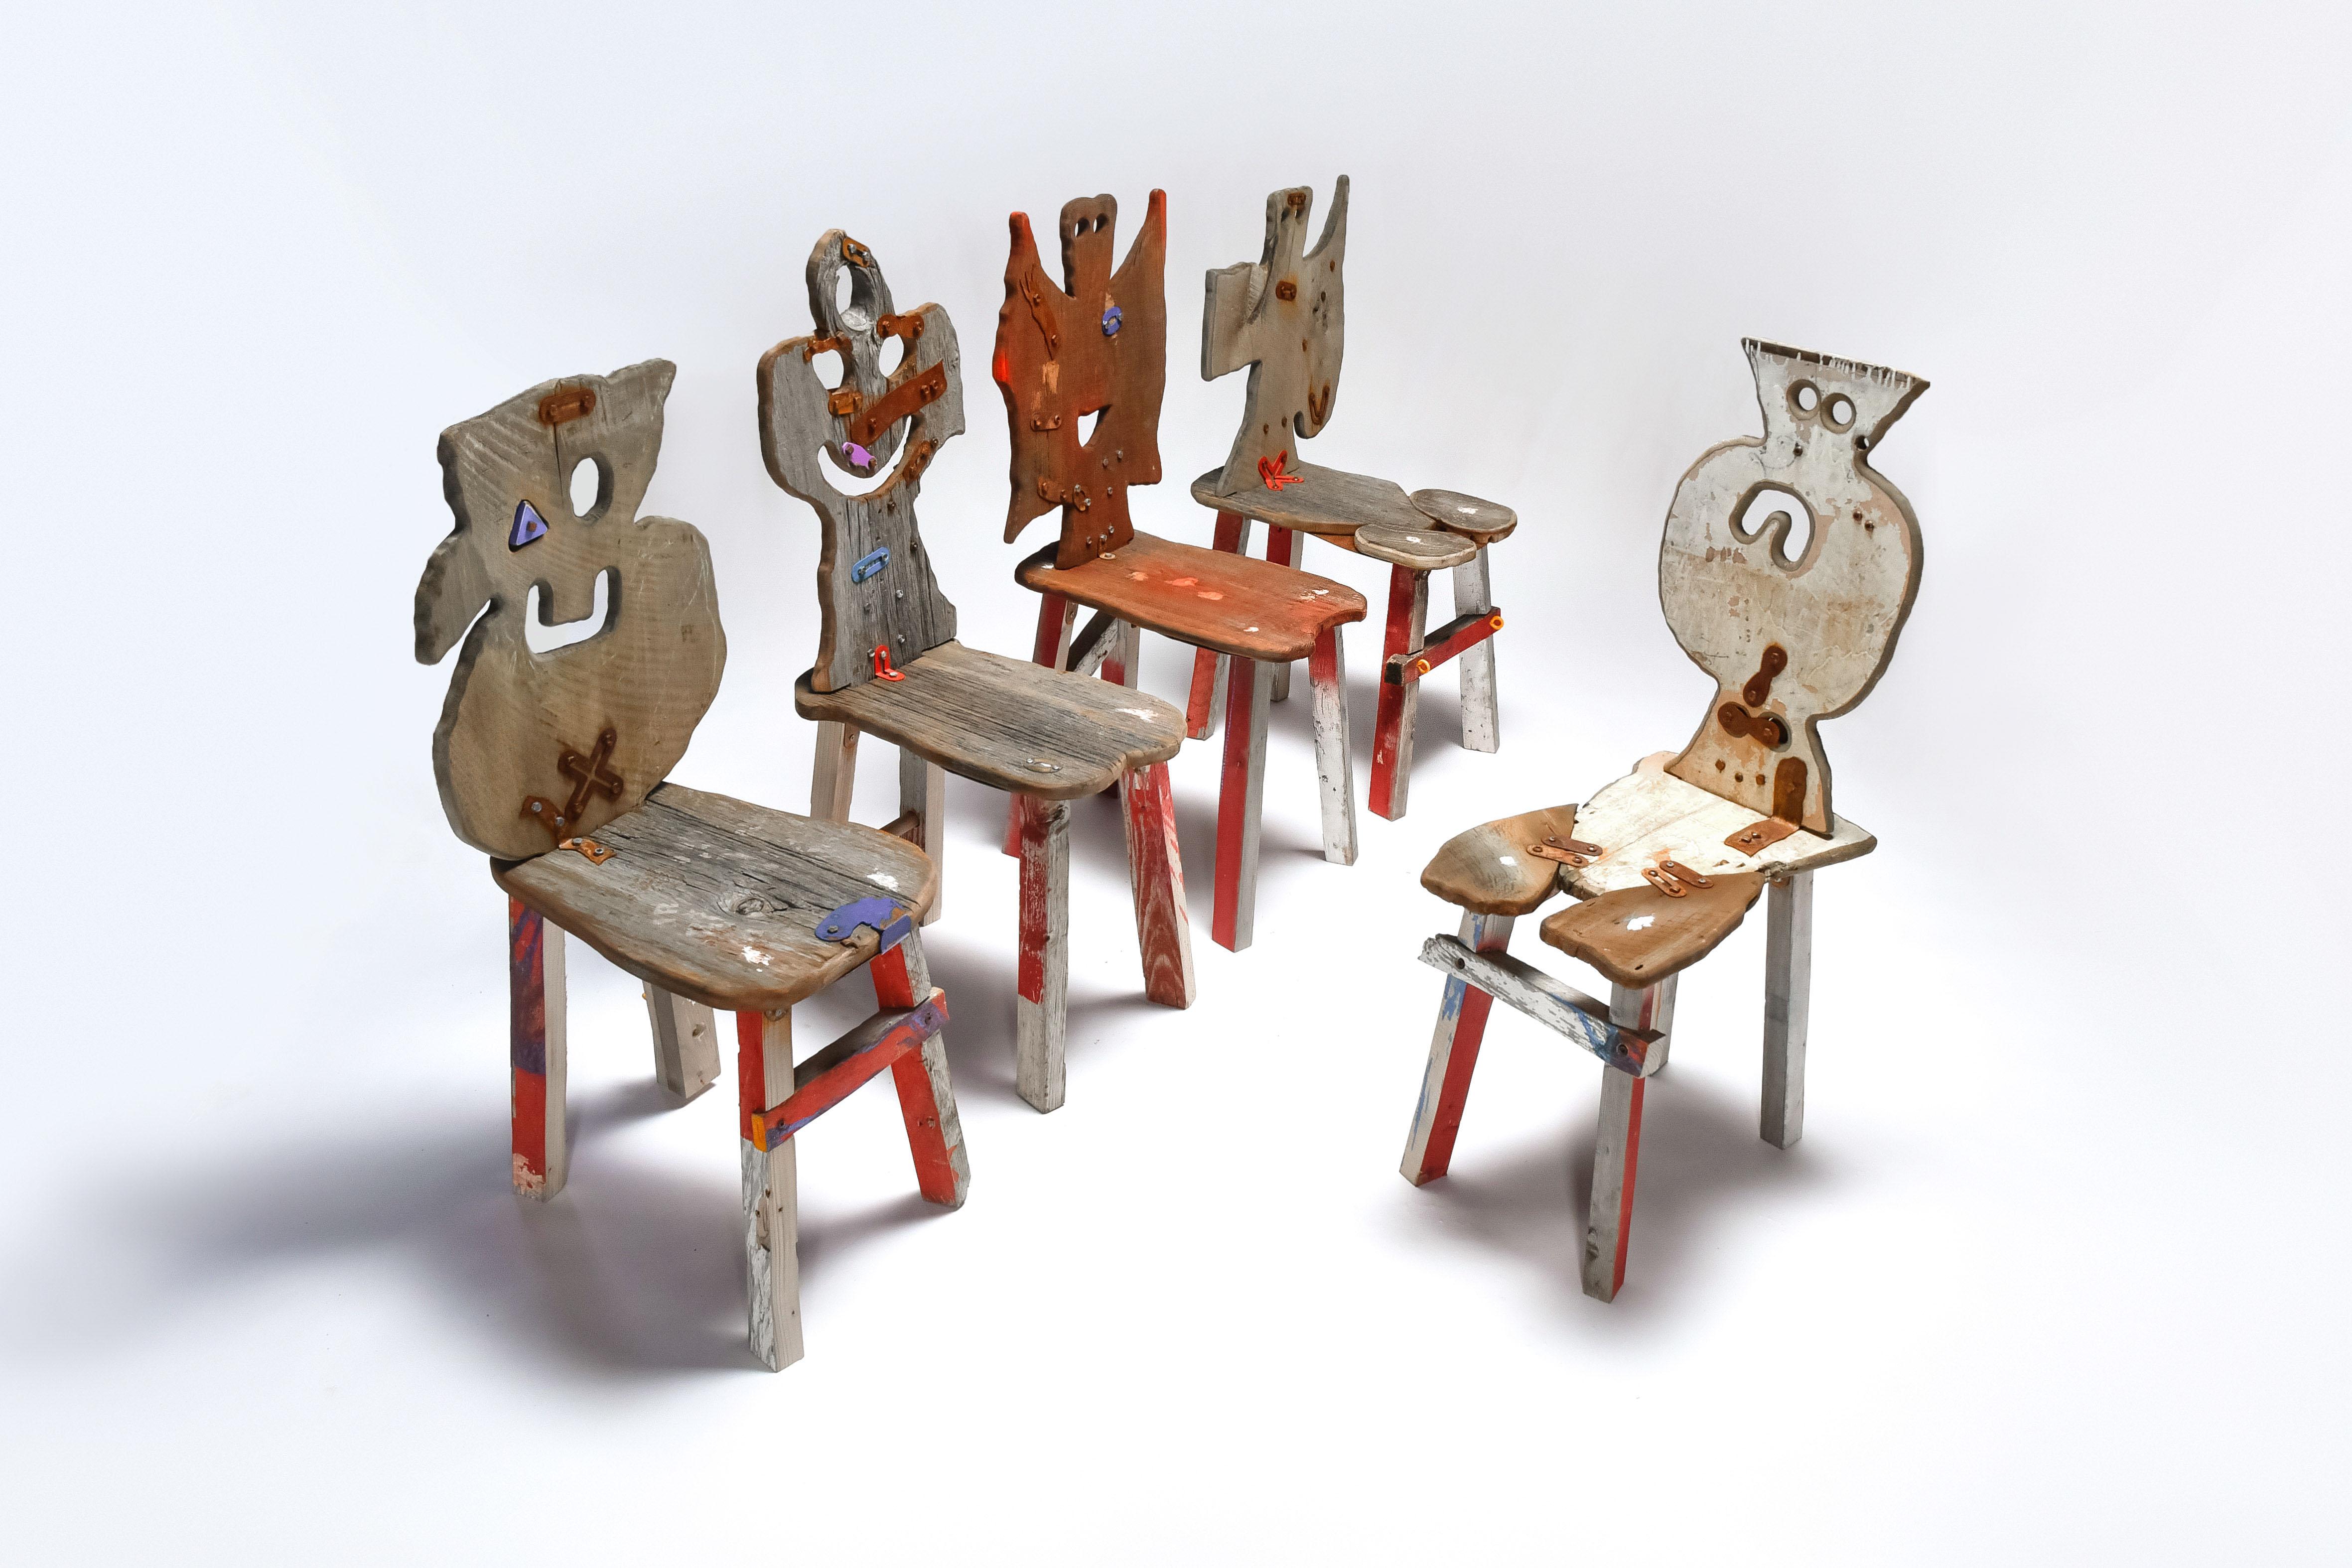 Contemporary Folks 30 Chair by Serban Ionescu